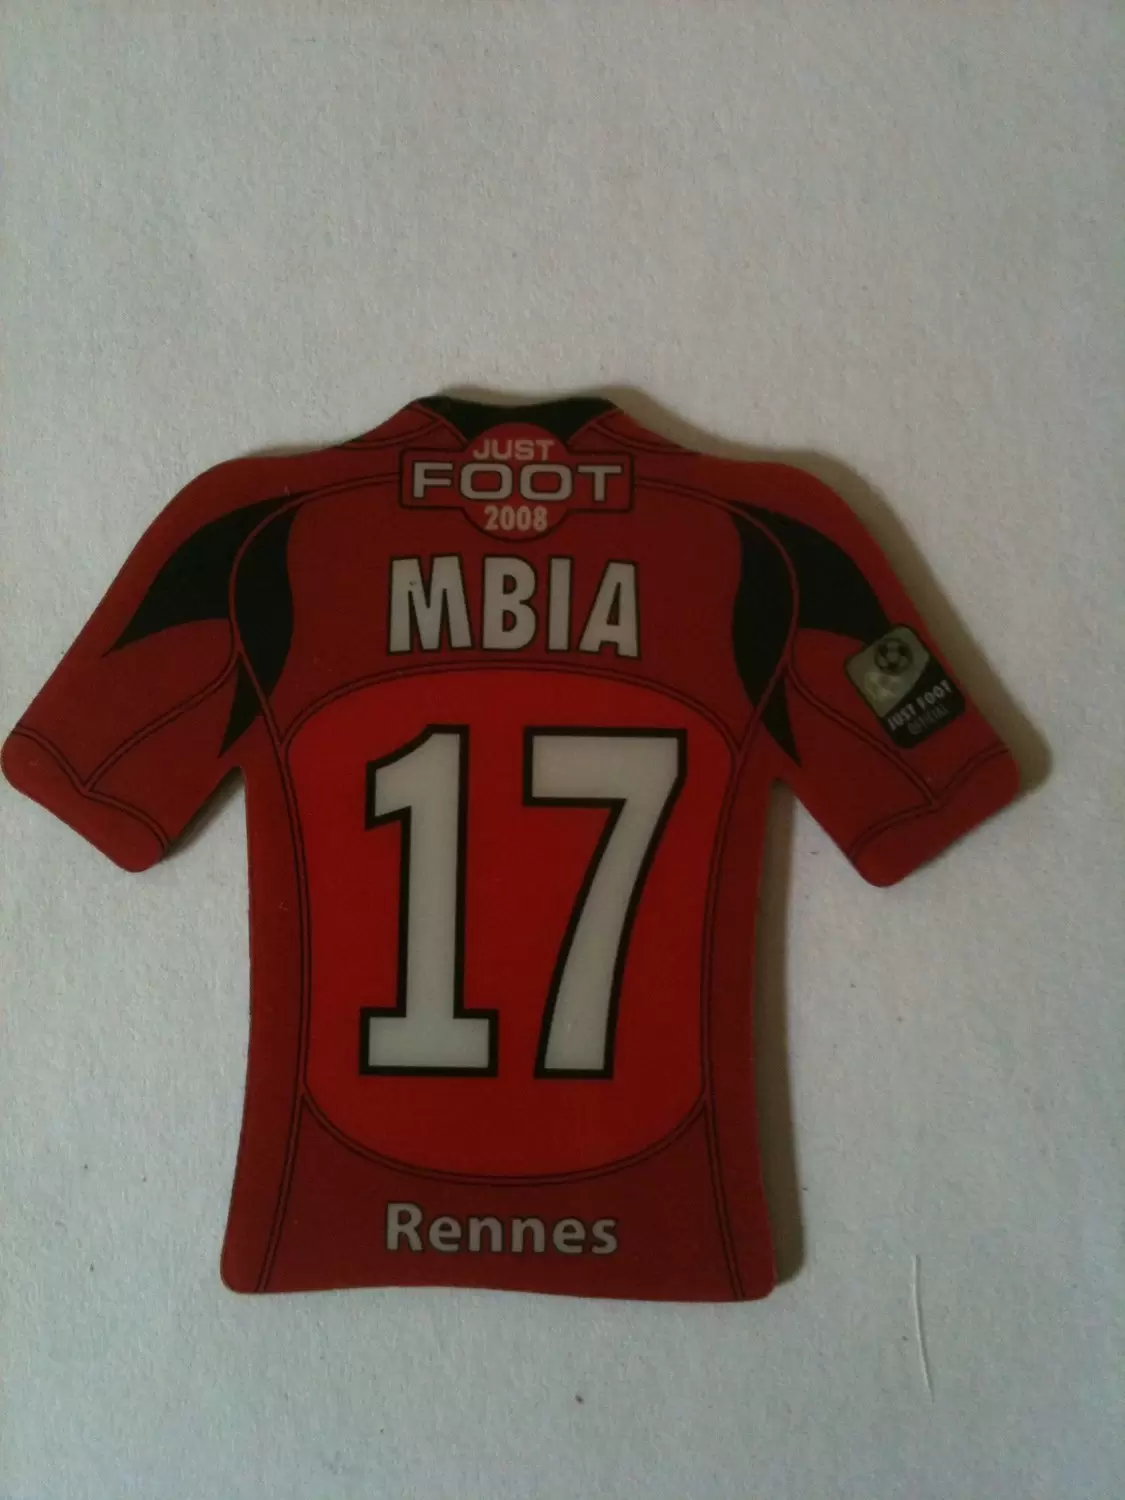 Just Foot 2008 - Rennes 17 - Mbia